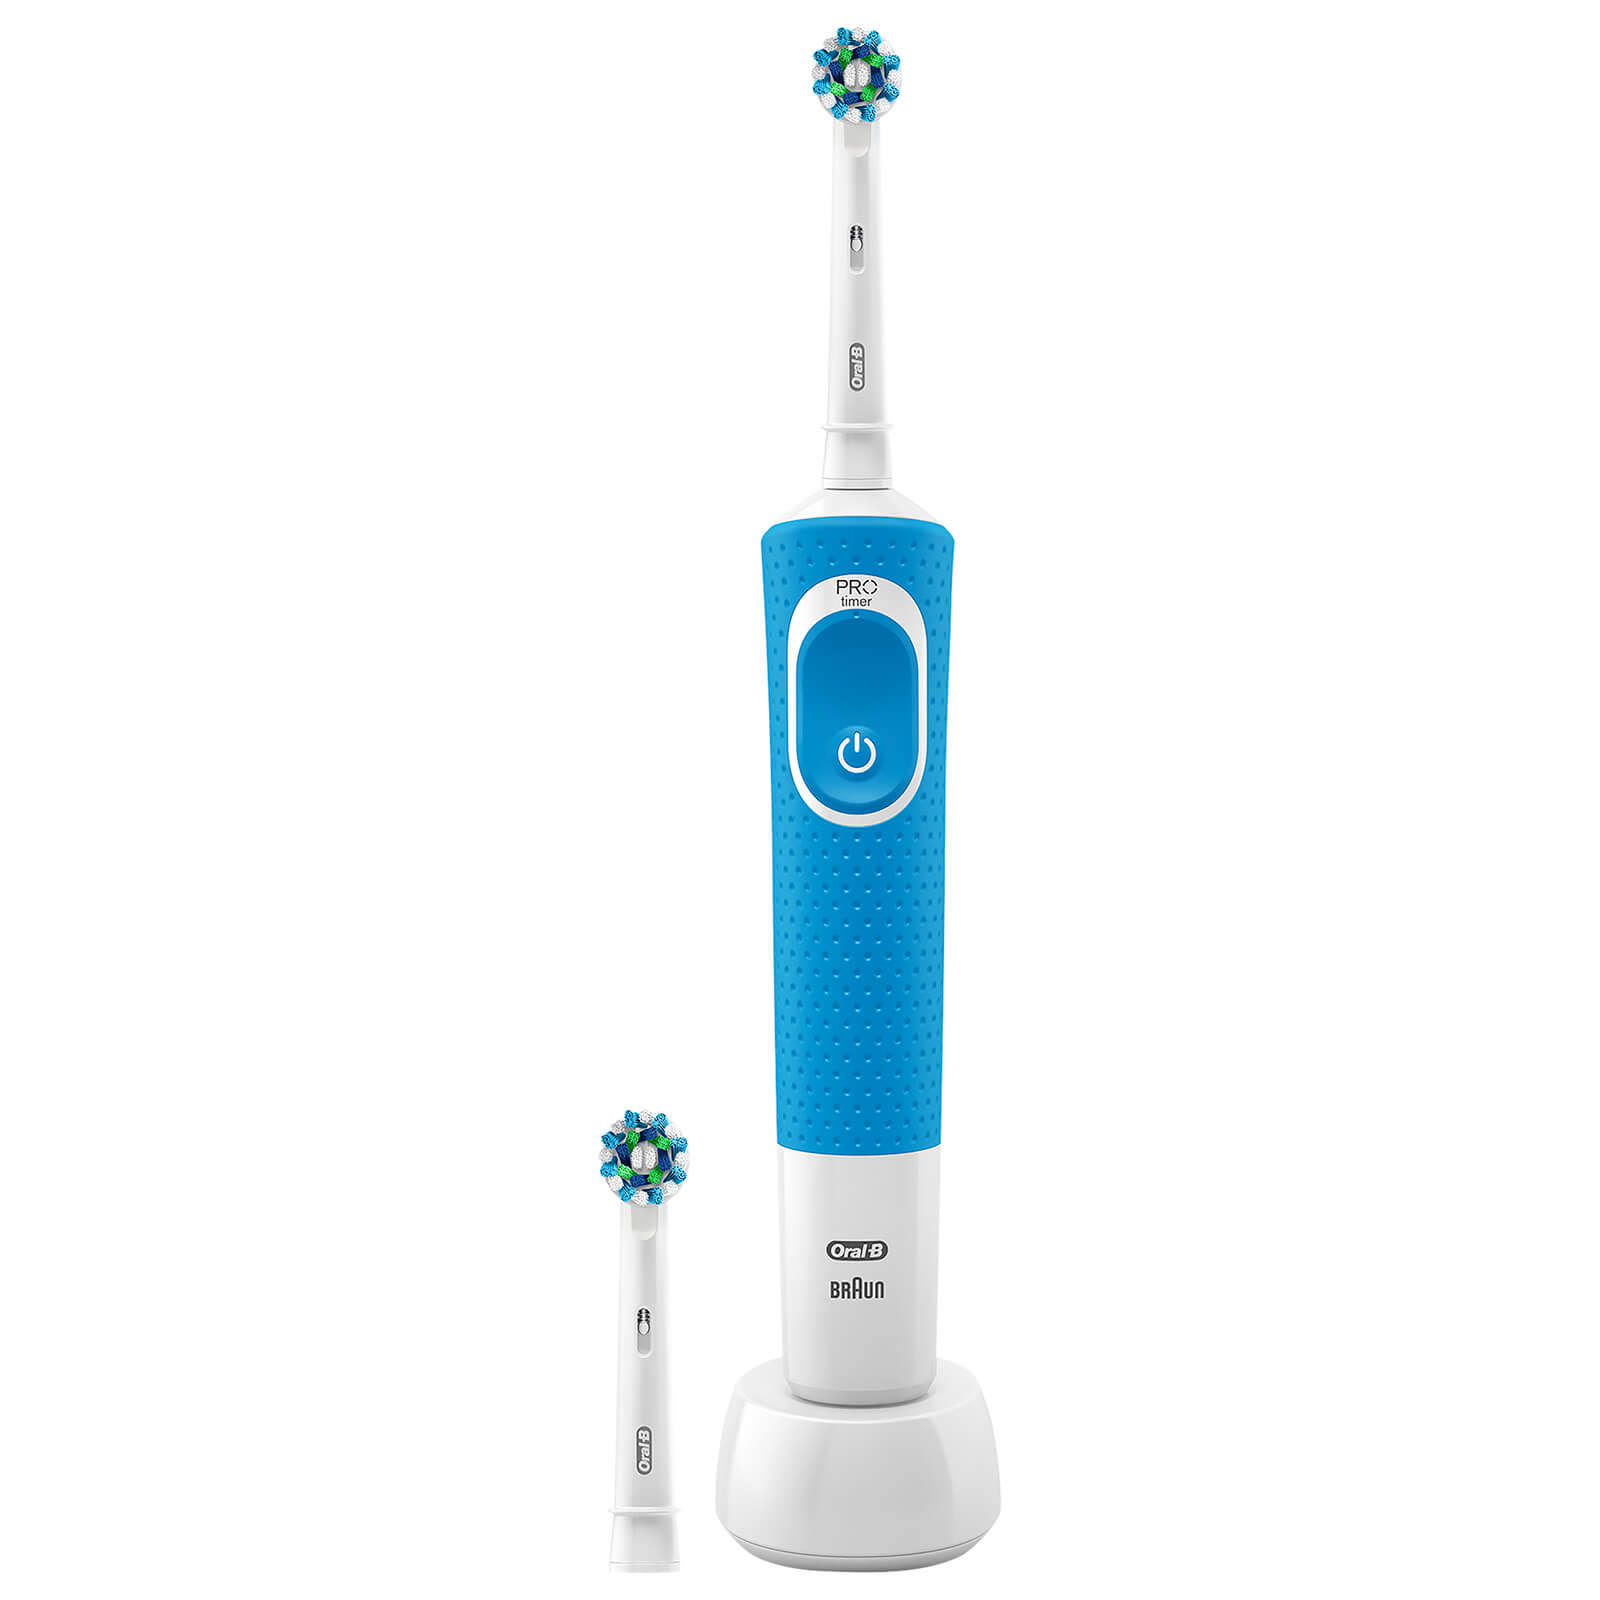 Oral-B Vitality Plus Electric Toothbrush - Blue